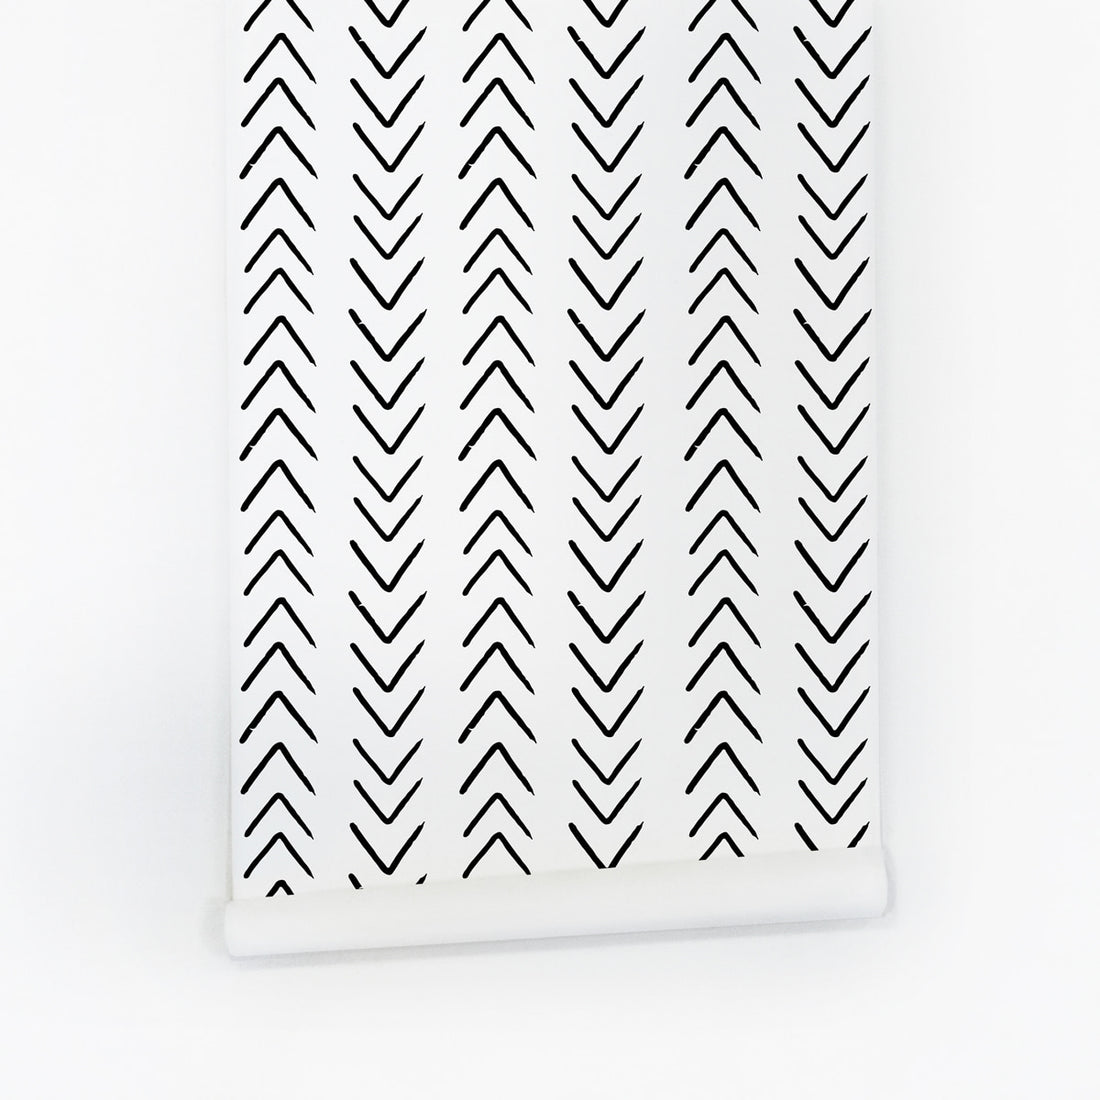 Black and white scandinavian arrows removable wallpaper